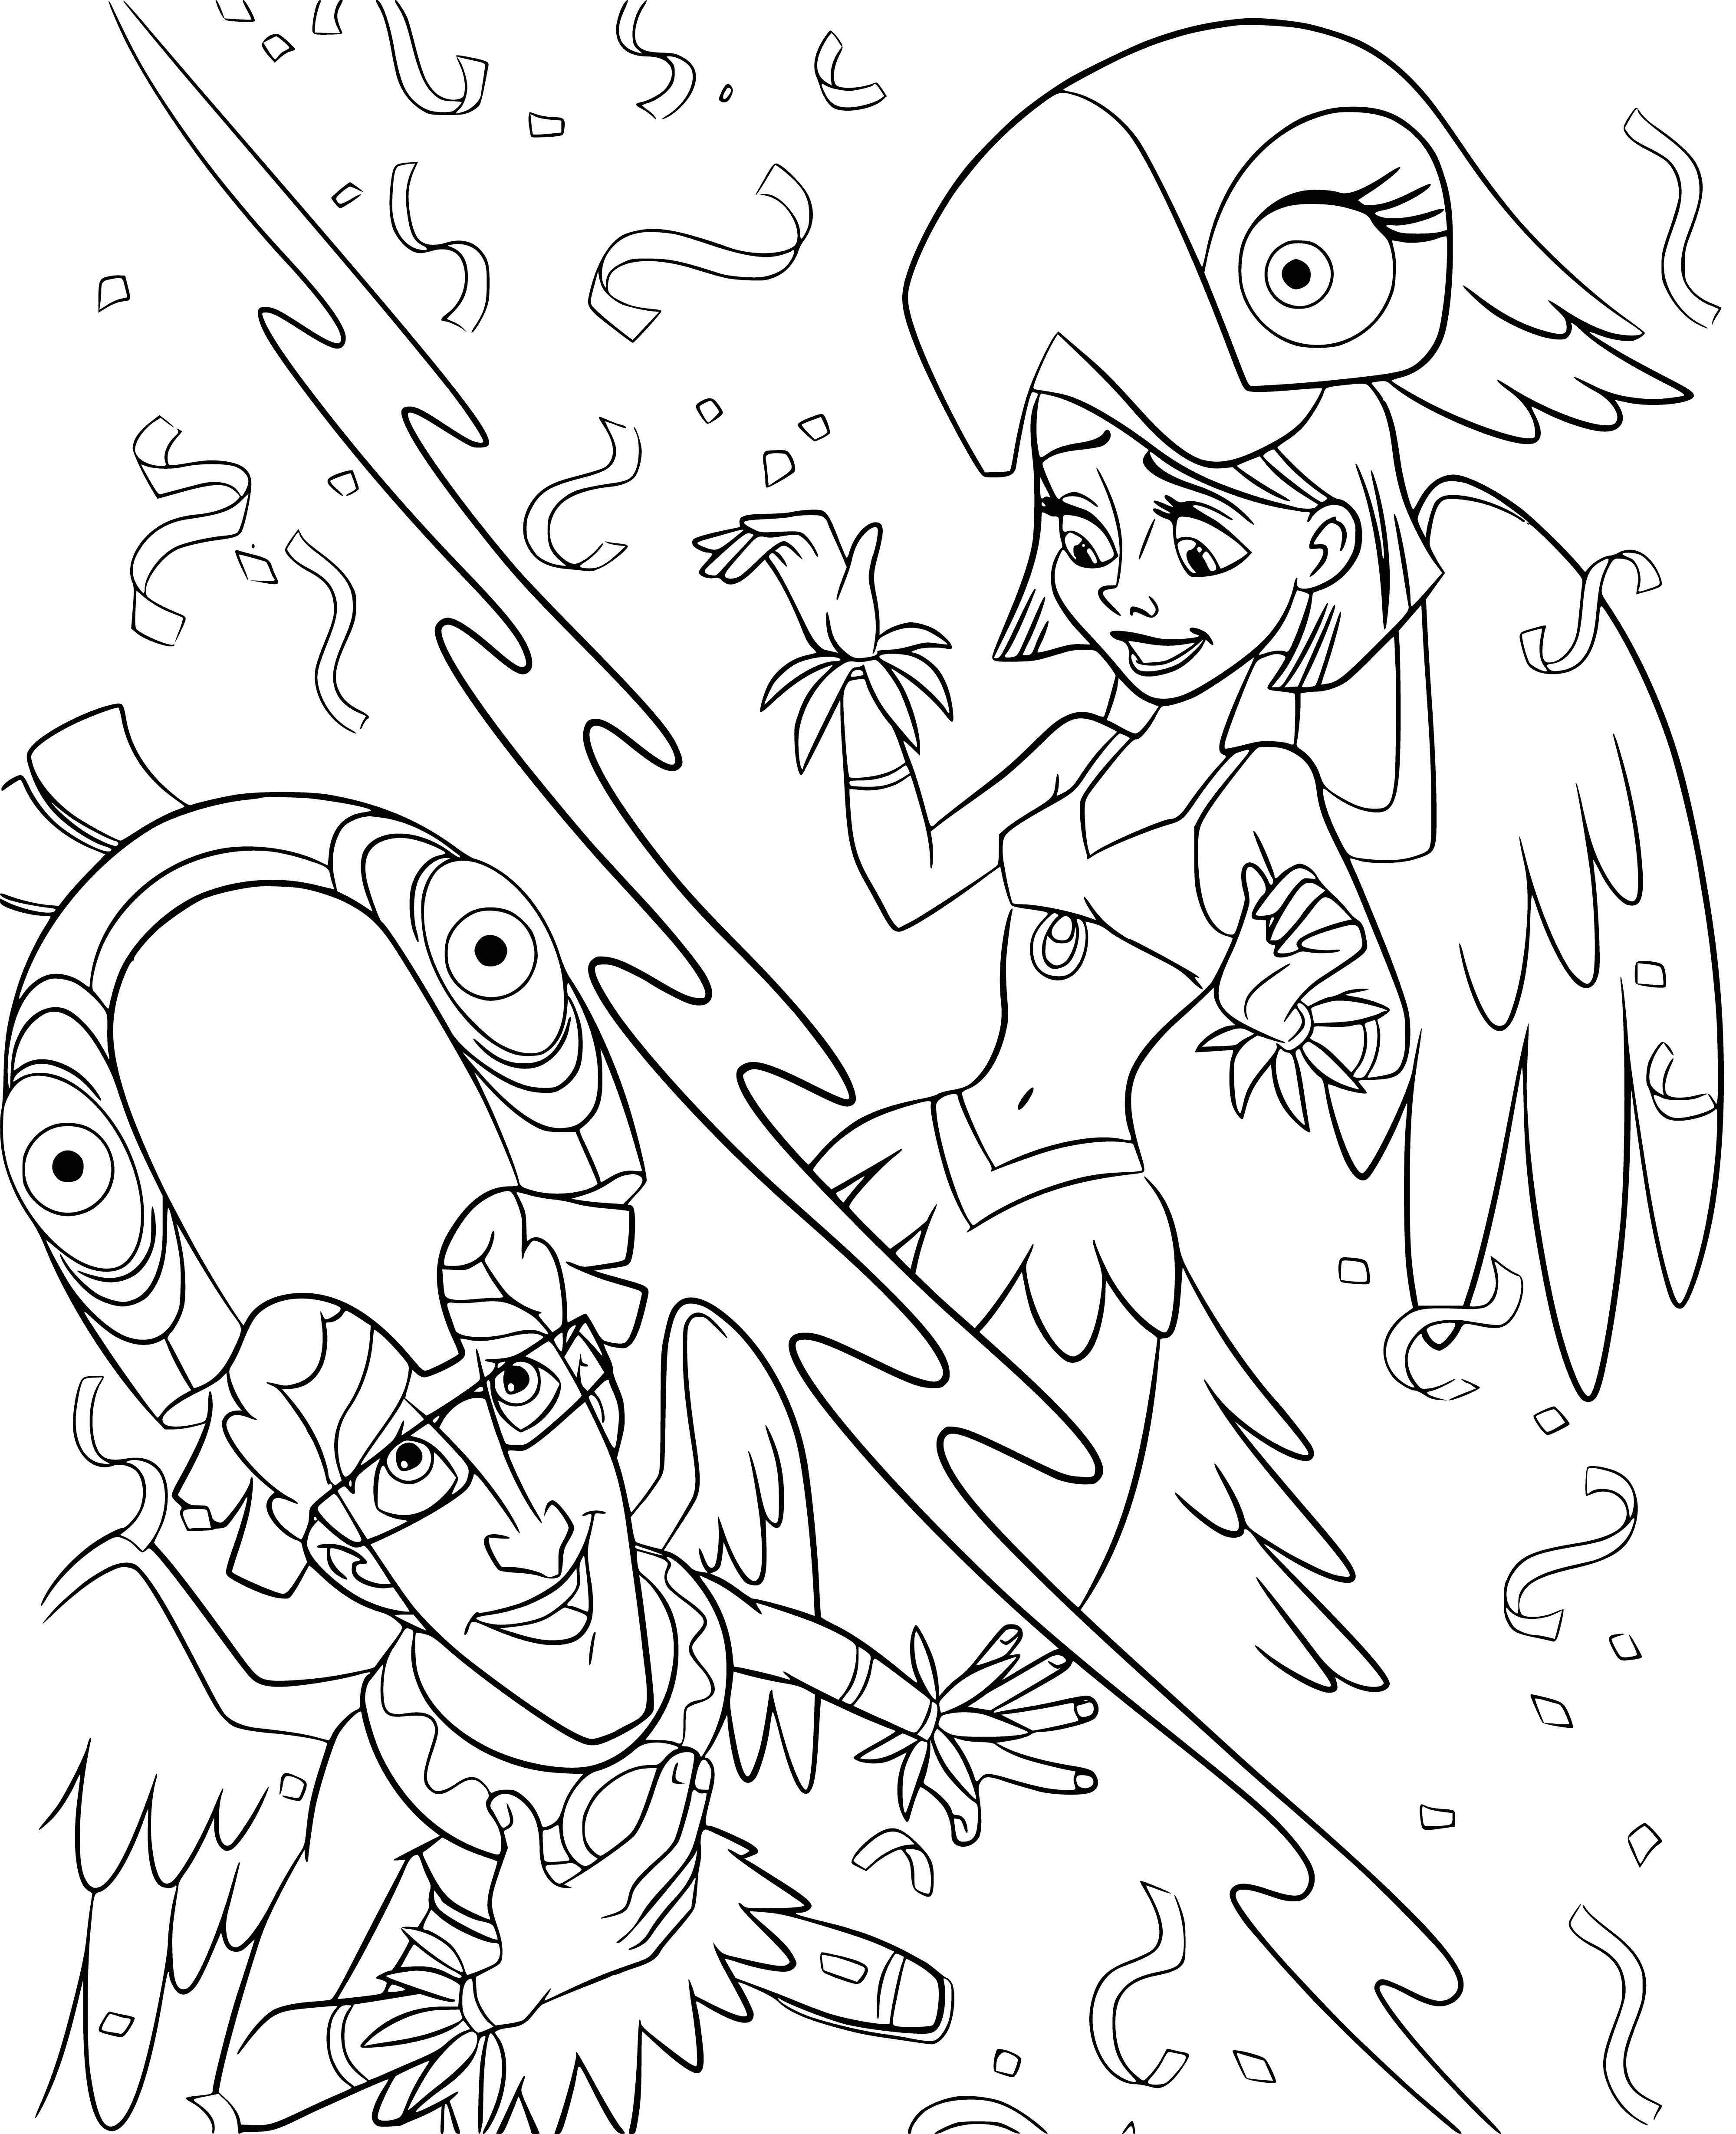 At the carnival coloring page